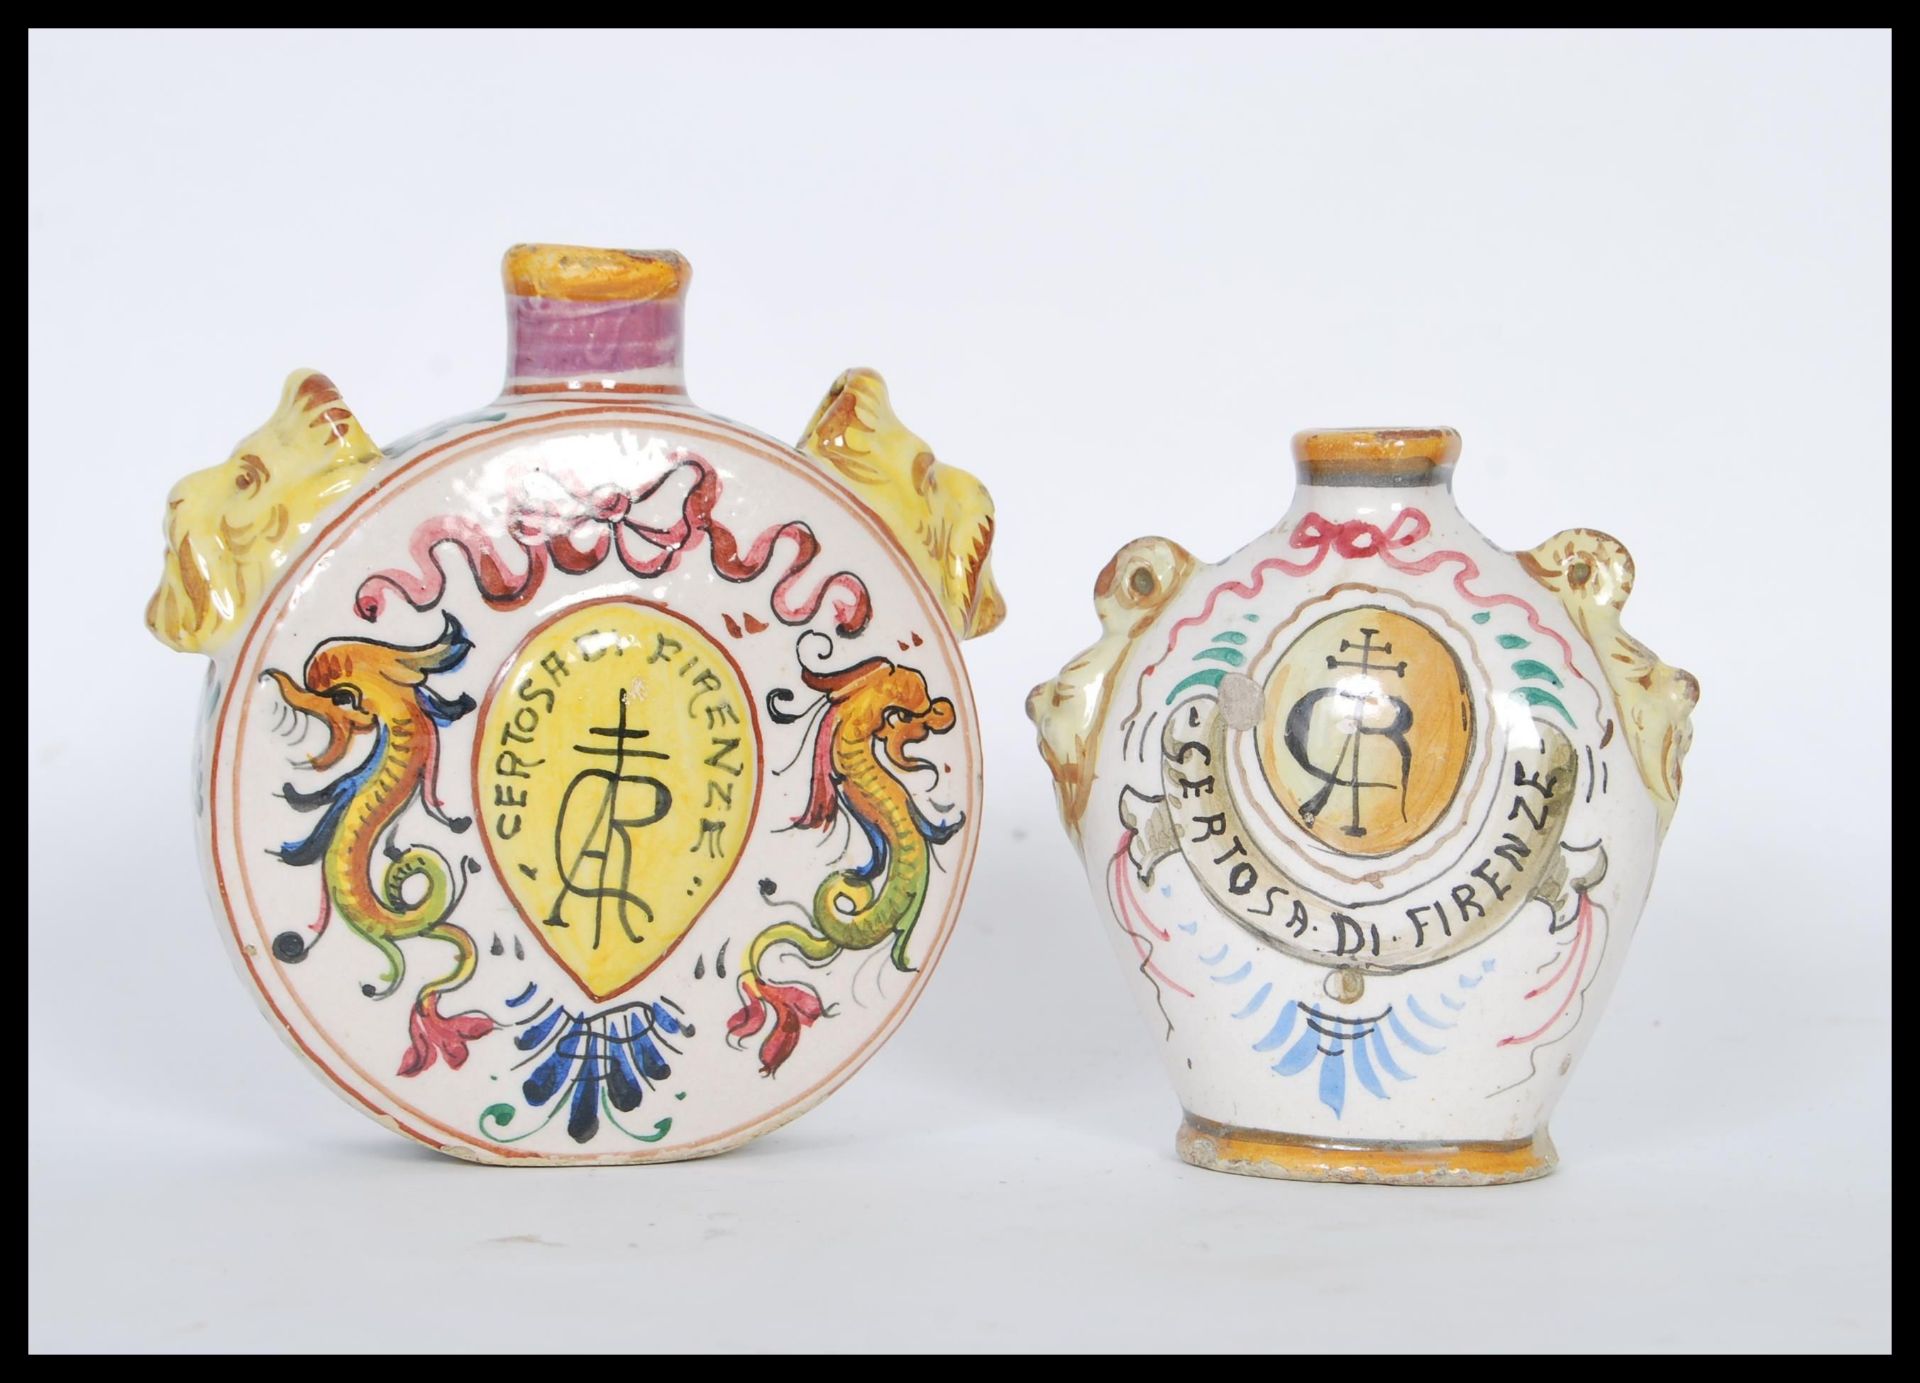 Two 20th Century Grand Tour faience continental Certosa Di Firenze ceramic bottles to include a moon